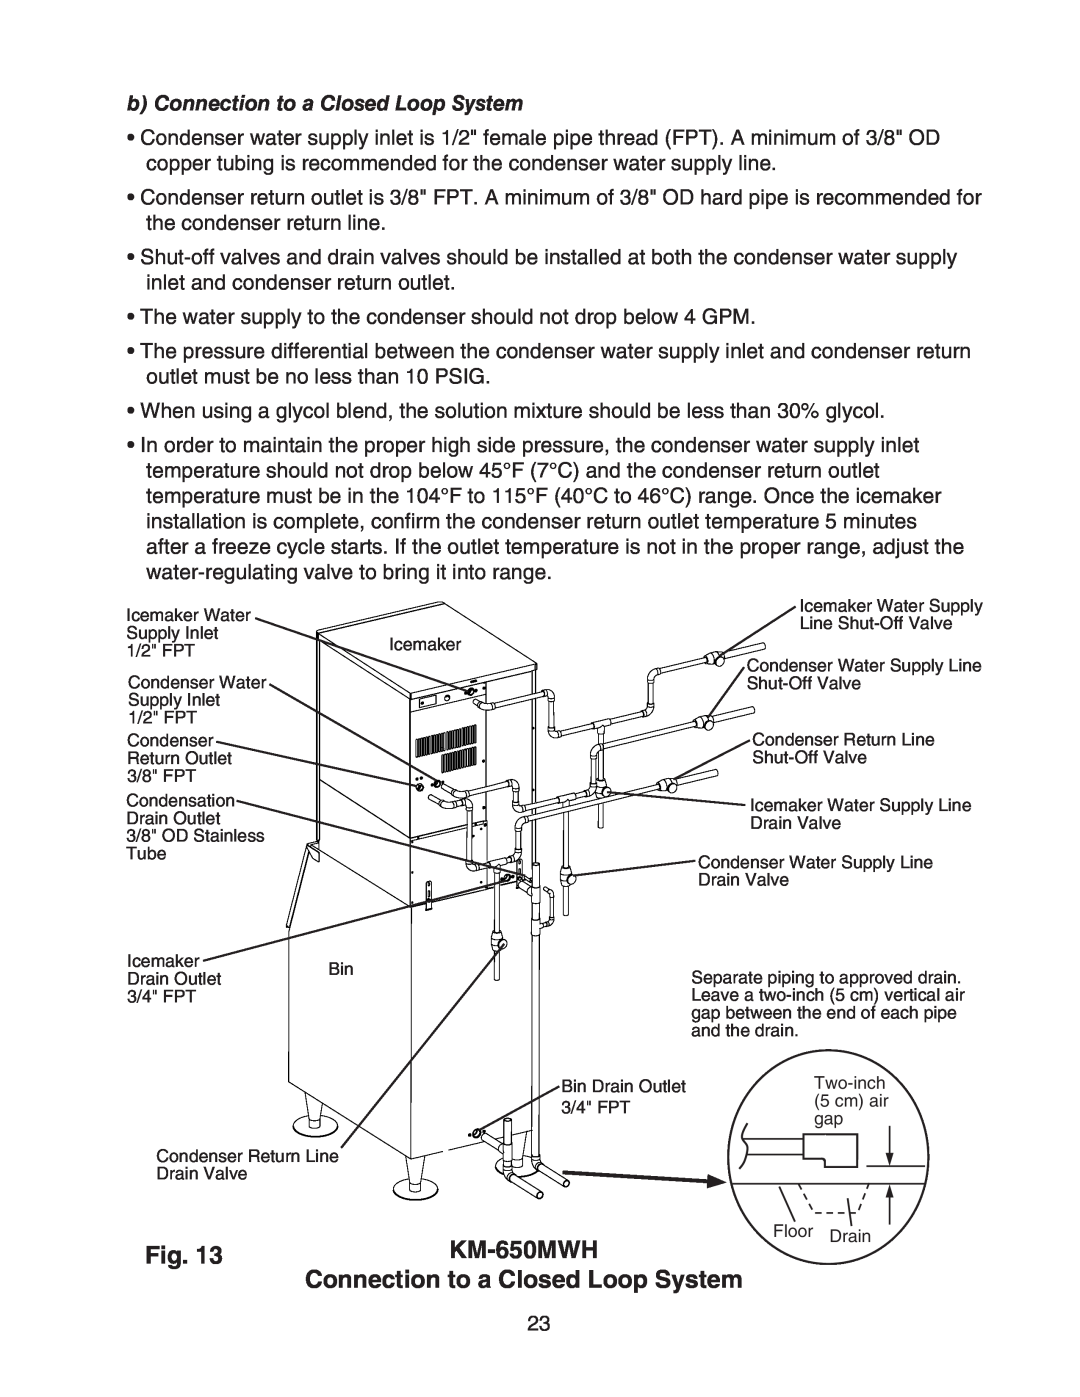 Hoshizaki KM-650MAH instruction manual b Connection to a Closed Loop System, KM-650MWH 